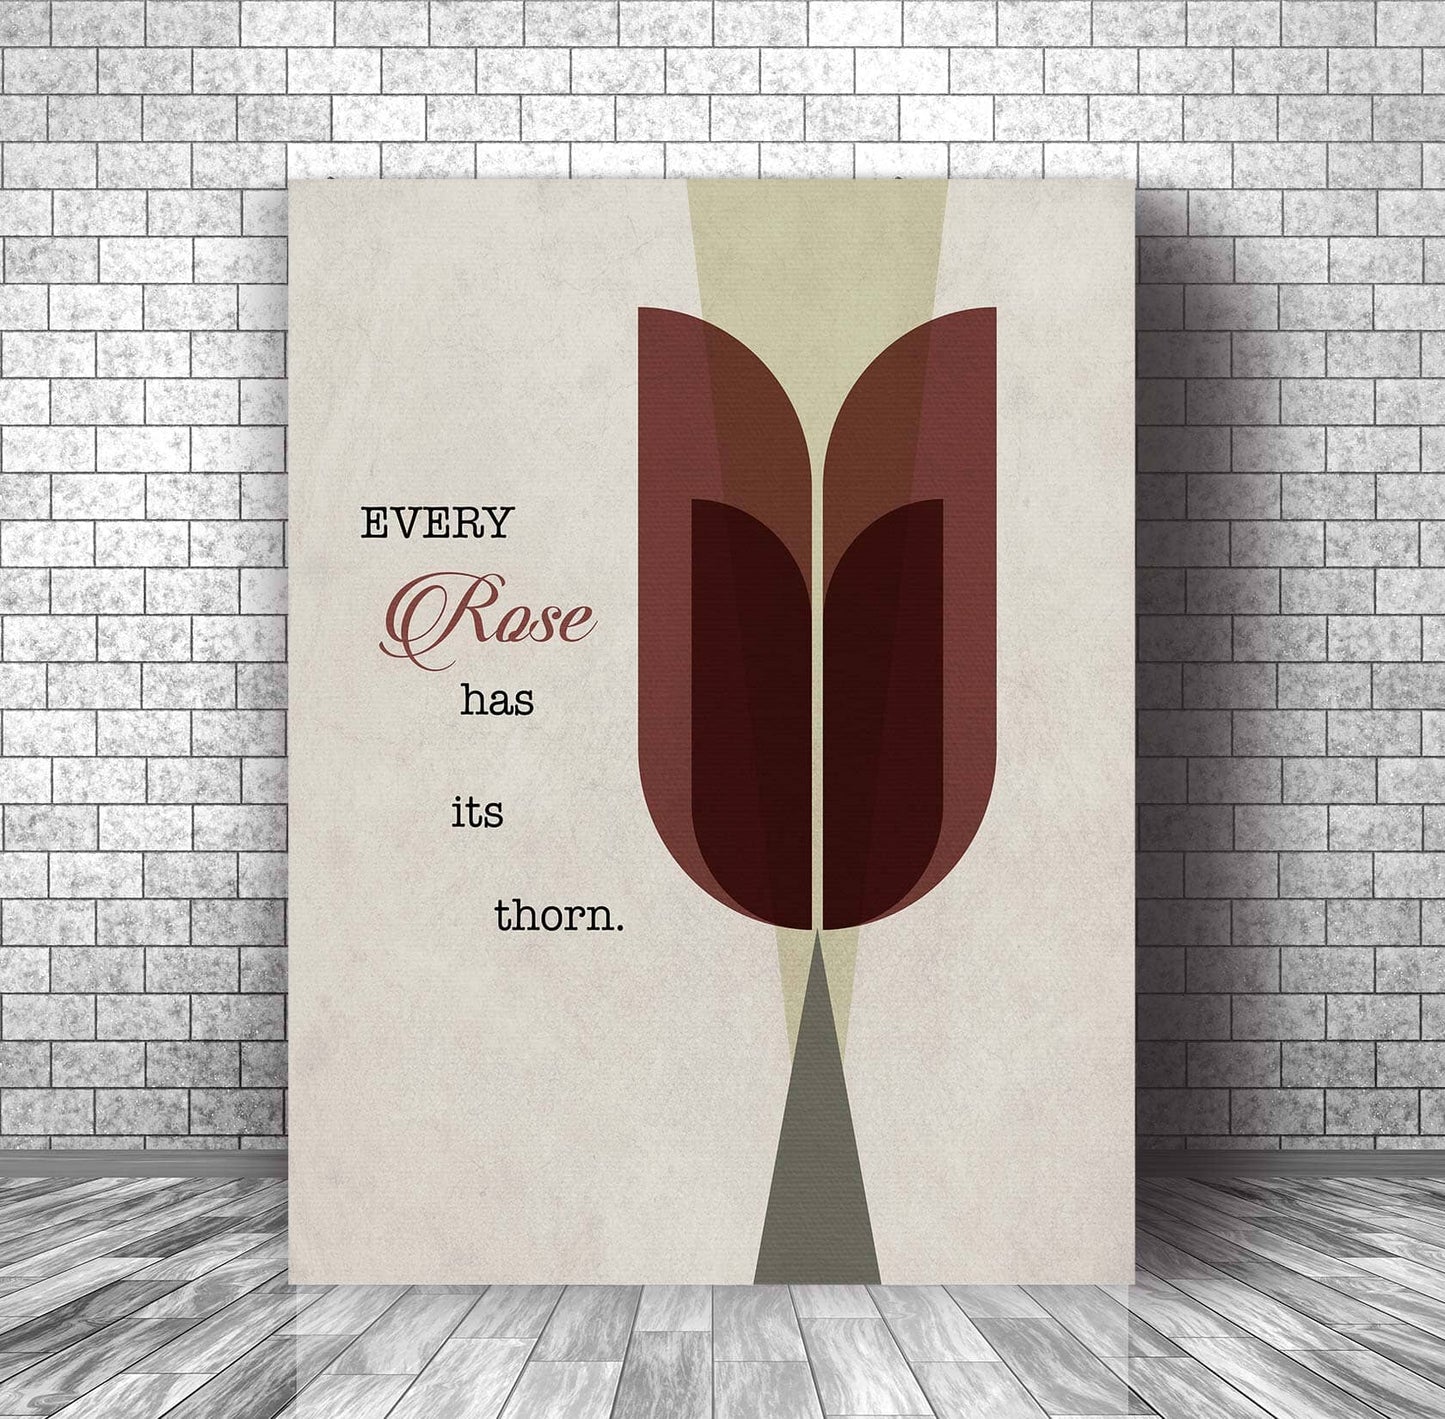 Every Rose Has Its Thorn by Poison - 80s Song Lyric Art Song Lyrics Art Song Lyrics Art 11x14 Canvas Wrap 